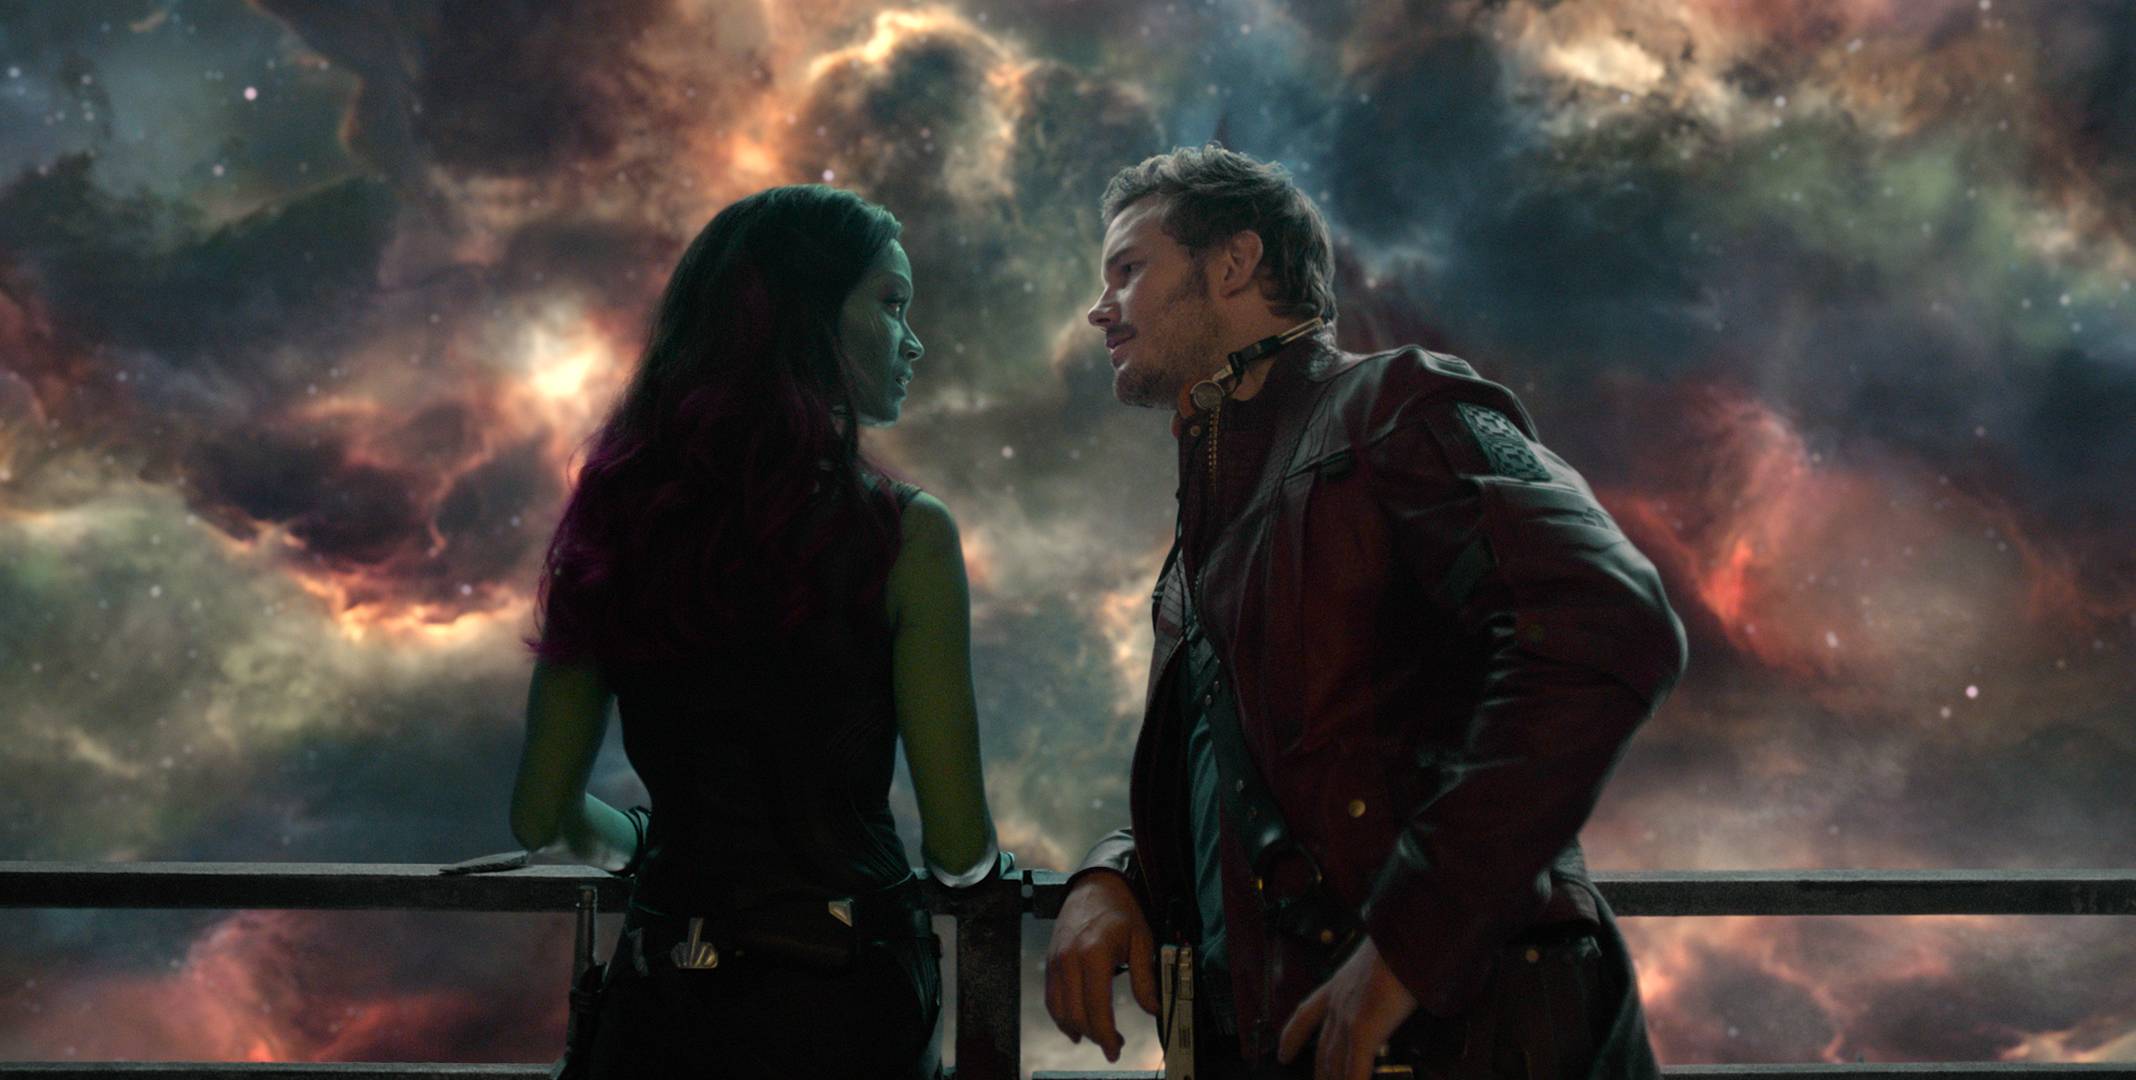 is guardians of the galaxy the best marvel movie yet 7d630a58 4db2 401a 9a79 fa4d951839ed